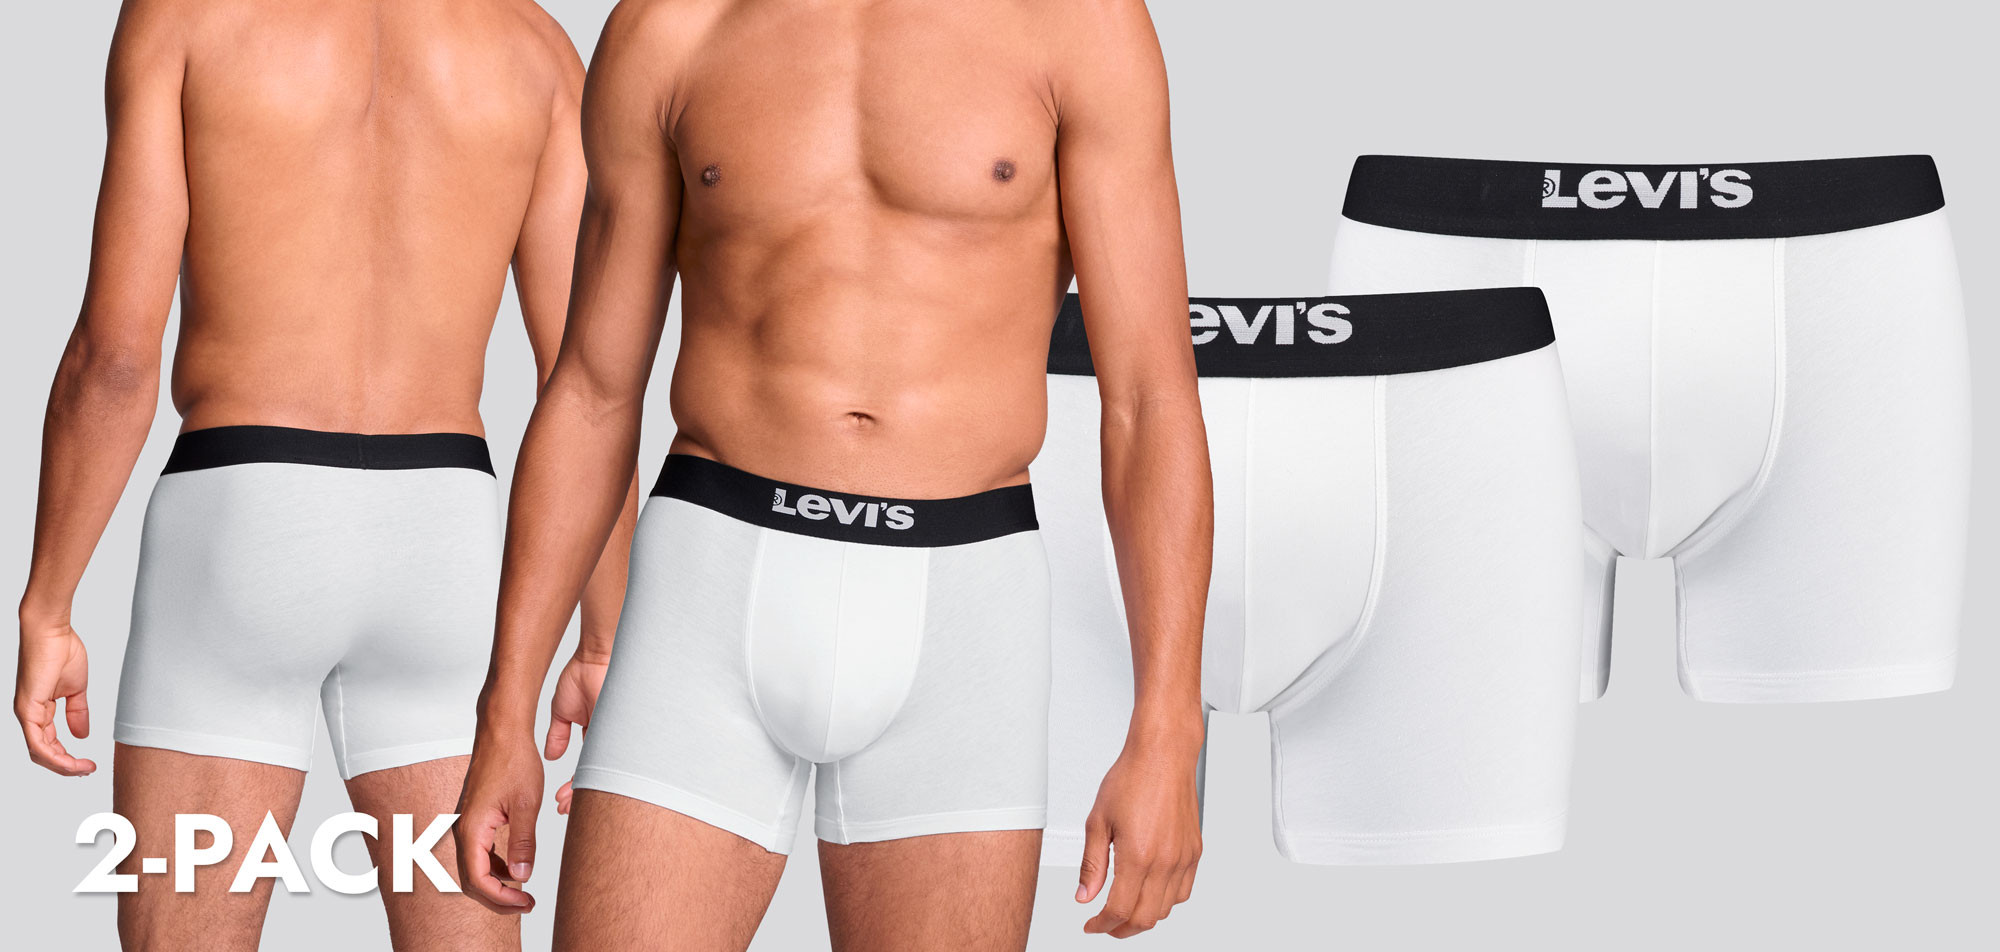 Levi_s Boxer Brief 2-Pack 842 Solid Basic,